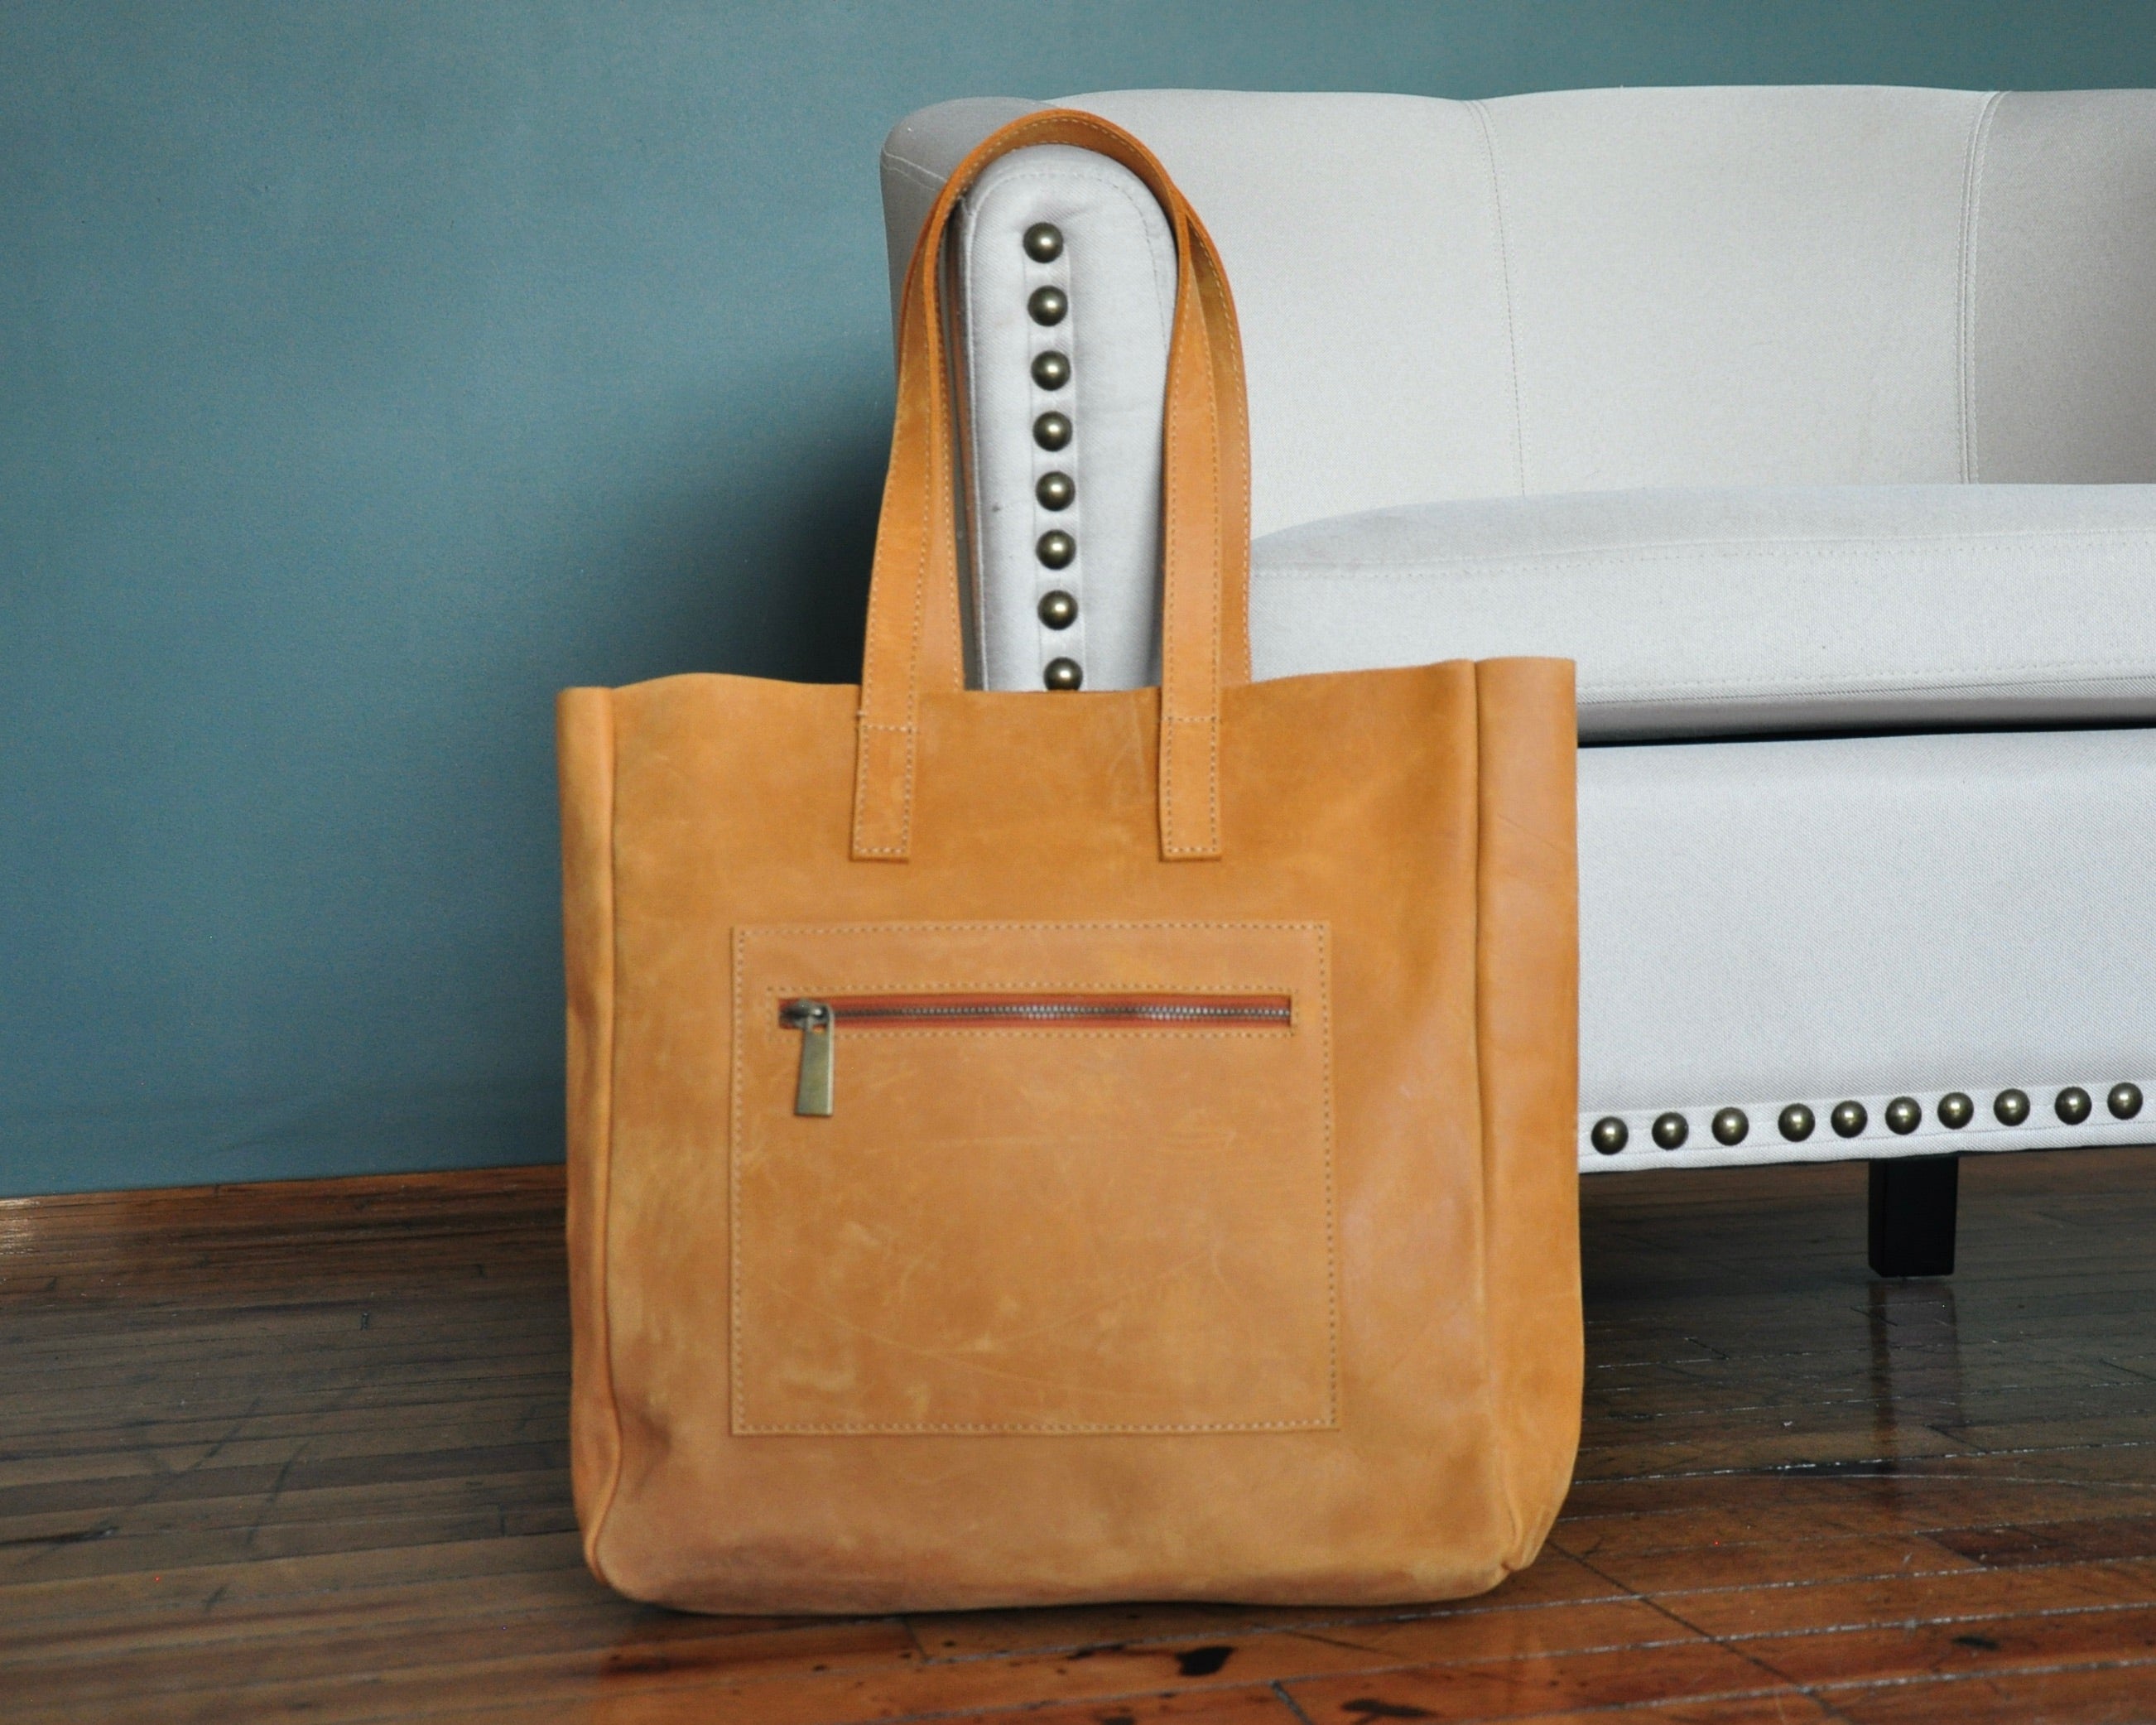 Unlined Tote